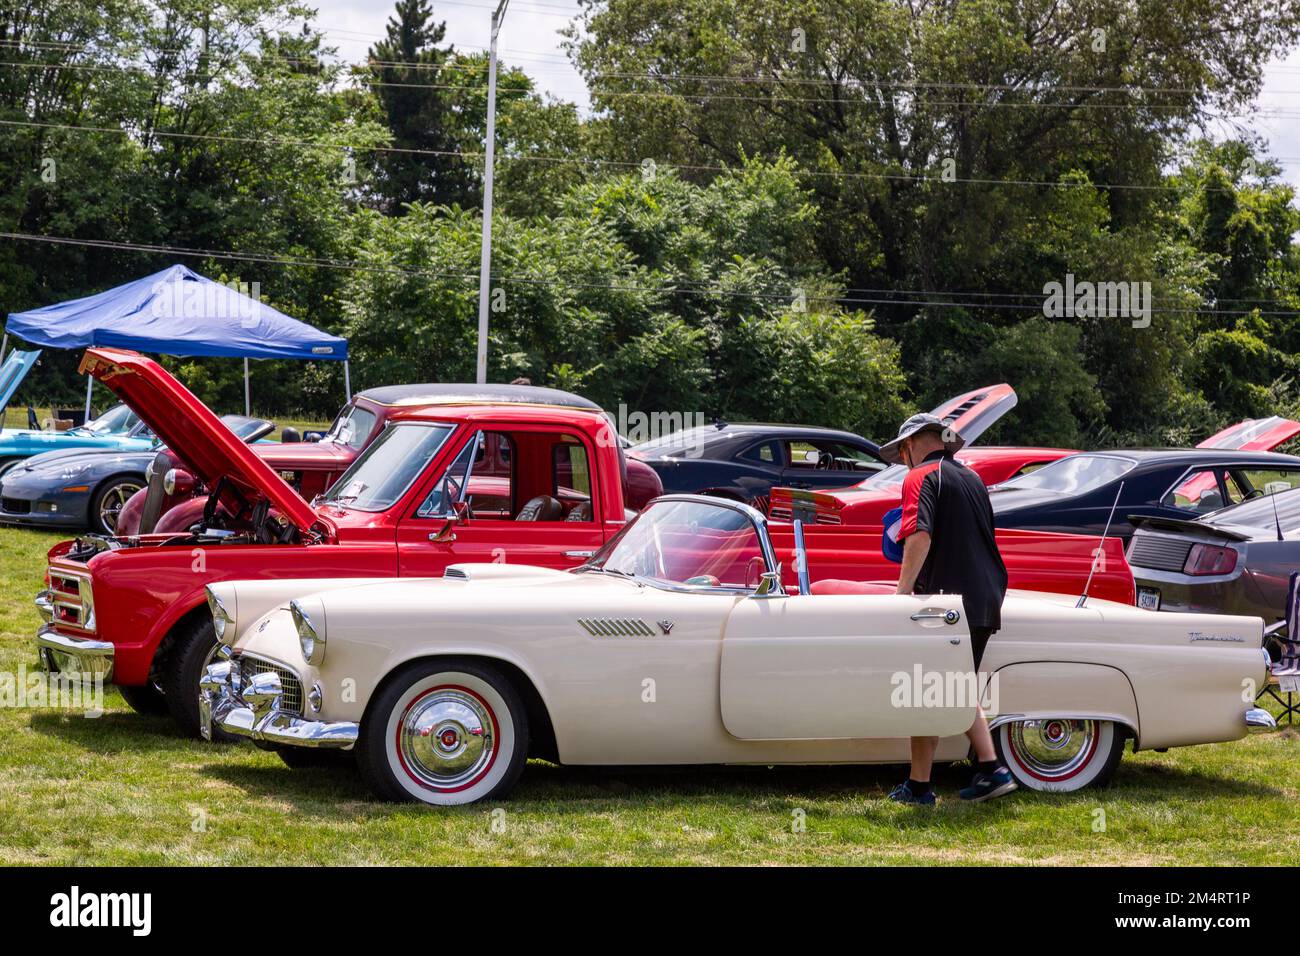 A white 1955 Ford Thunderbird parked next to a red 1967 Chevrolet pickup truck at a car show in Fort Wayne, Indiana, USA. Stock Photo